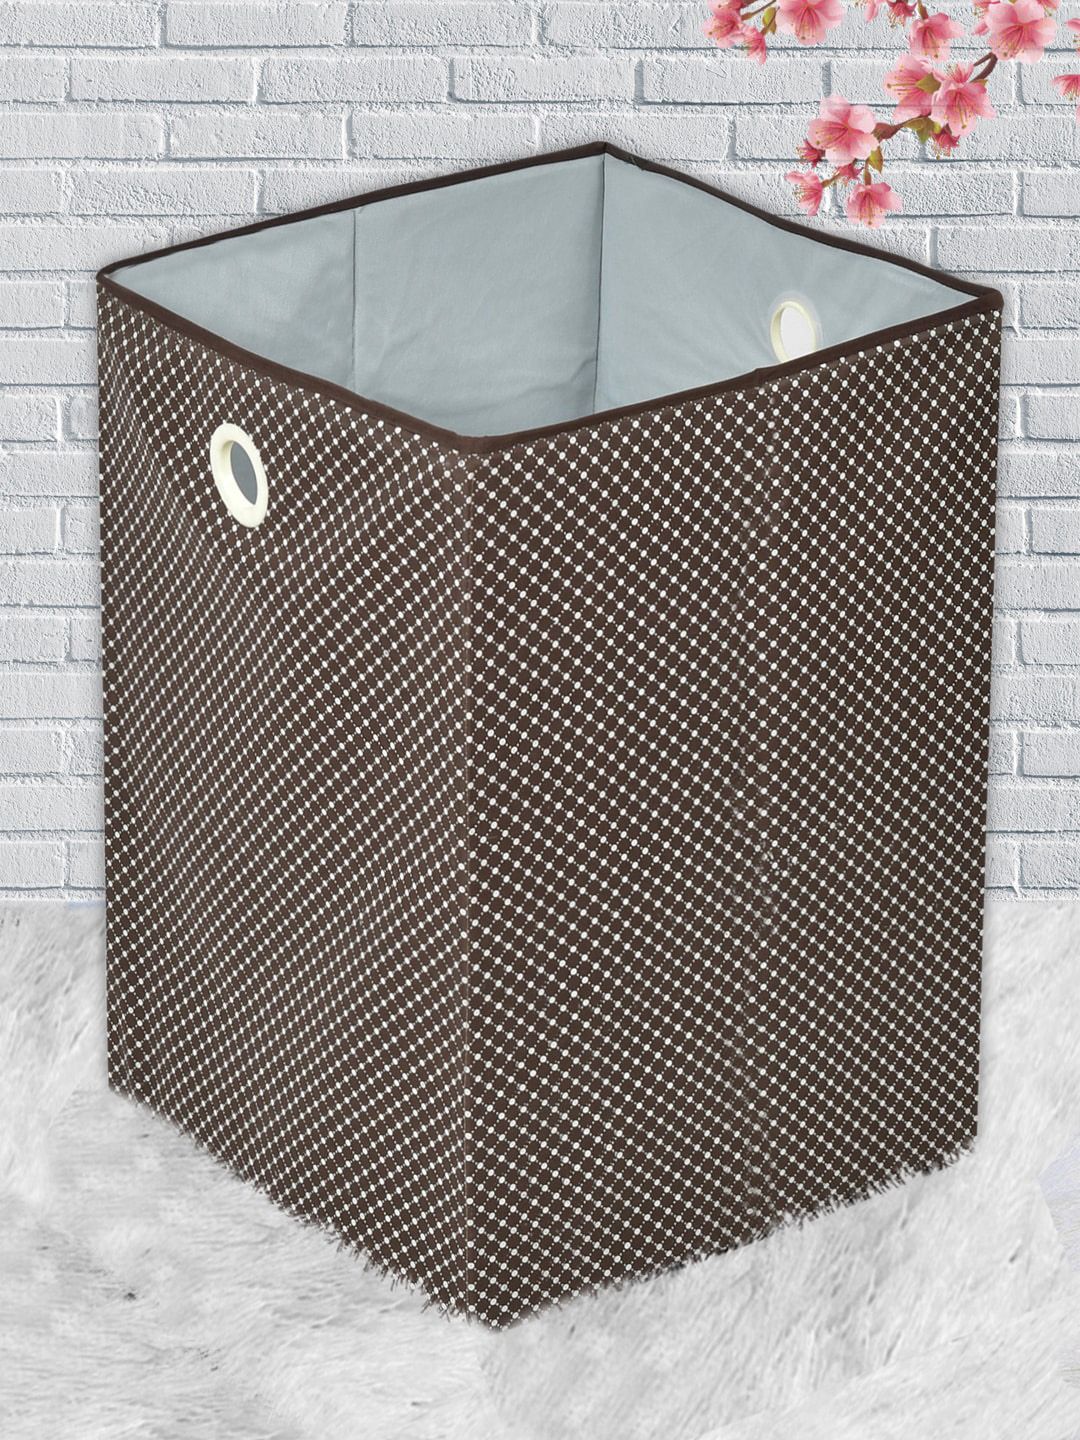 Kuber Industries Maroon Polka Dot Printed Cotton Foldable Large Laundry Basket Price in India